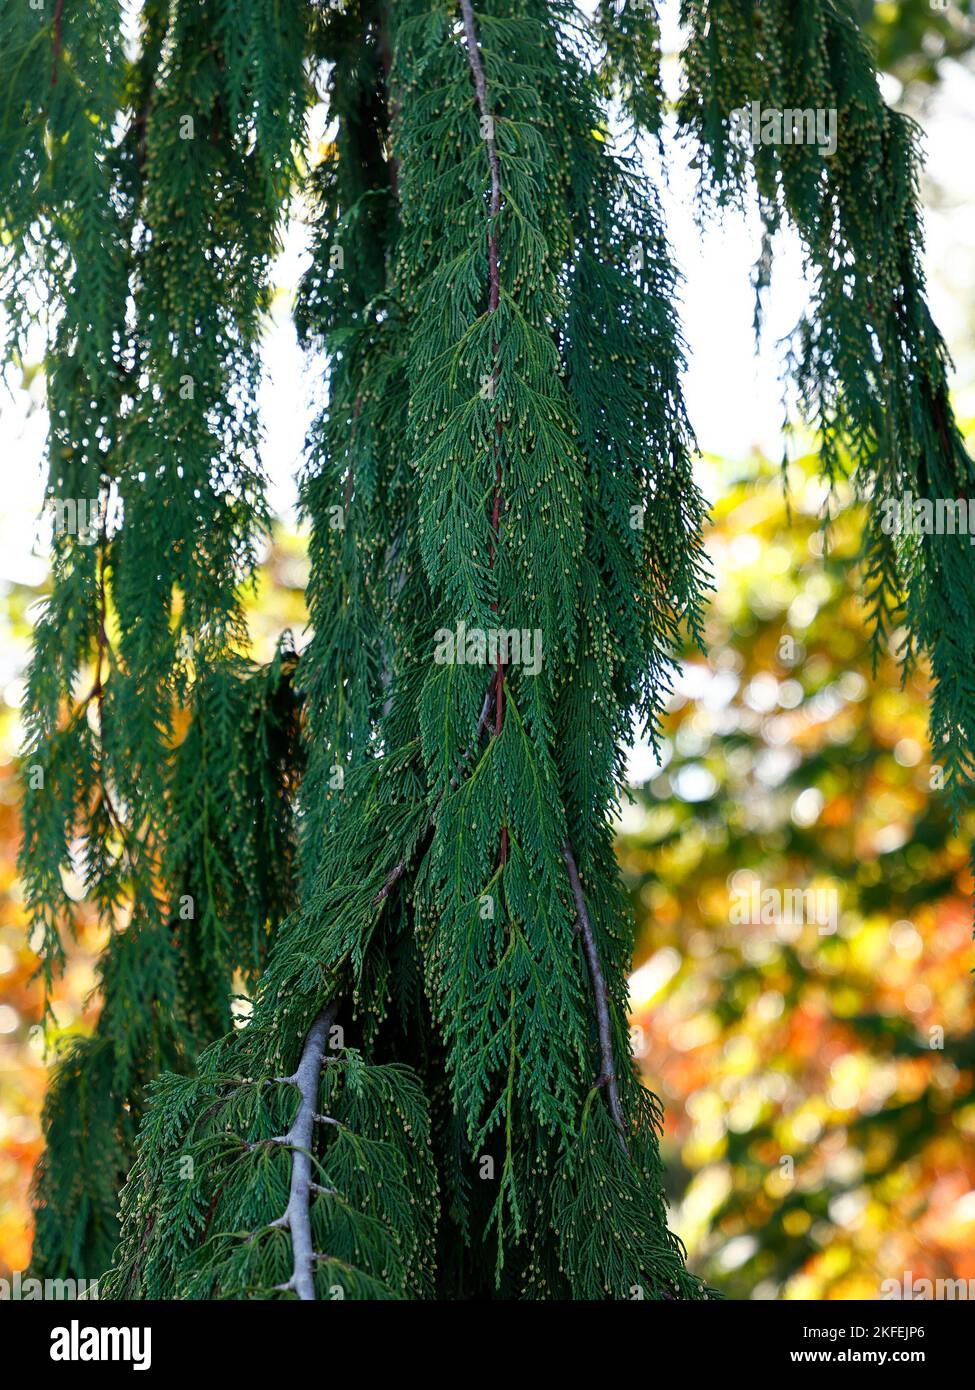 Close up of the evergreen conifer with pendulous branches chamaecyparis nootkatensis green arrow. Stock Photo